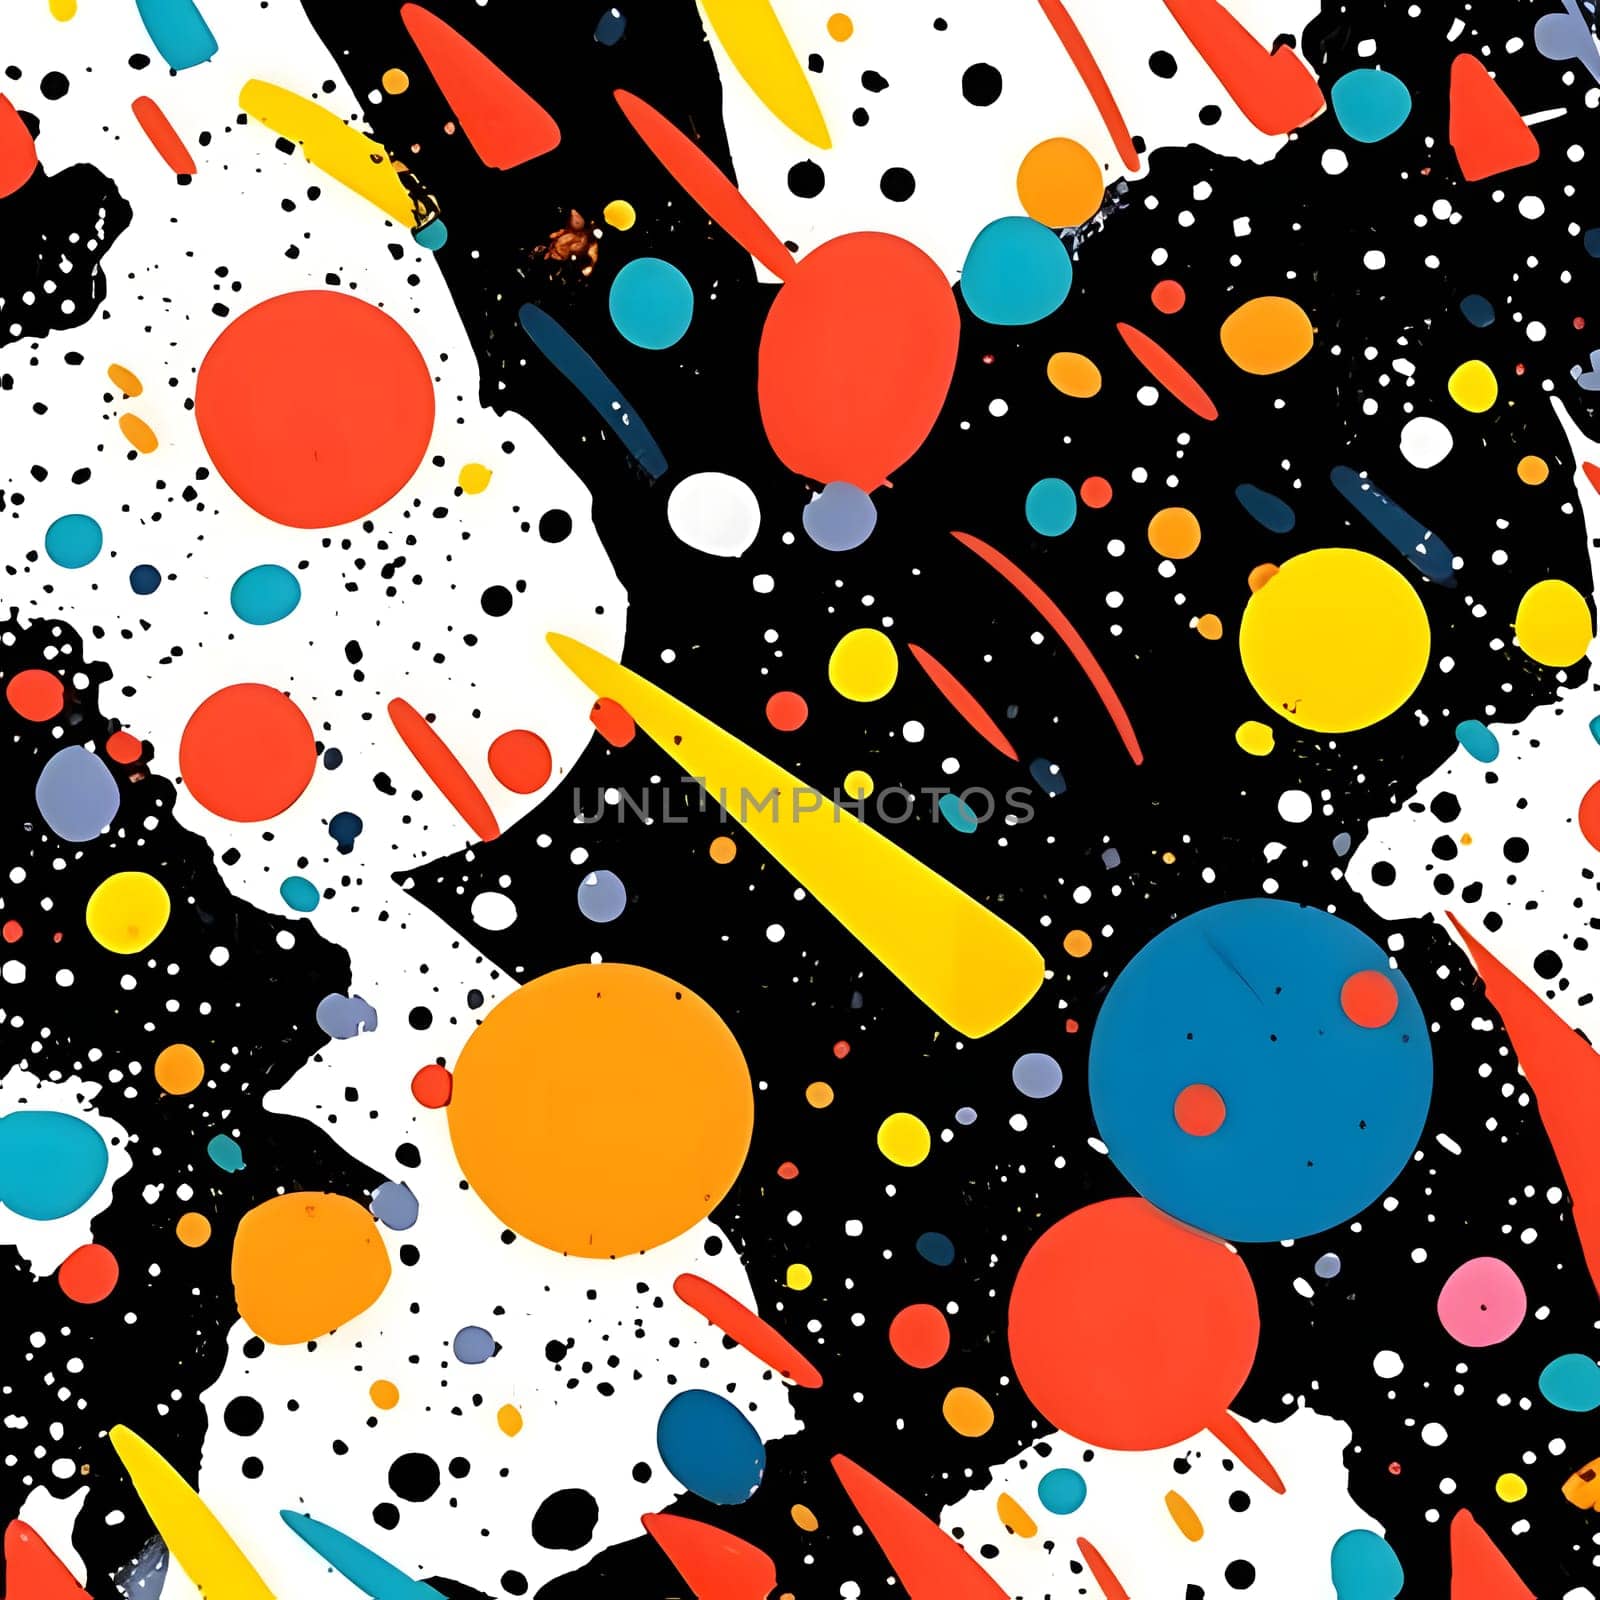 Patterns and banners backgrounds: Seamless pattern with multicolored spots of paint on a black background